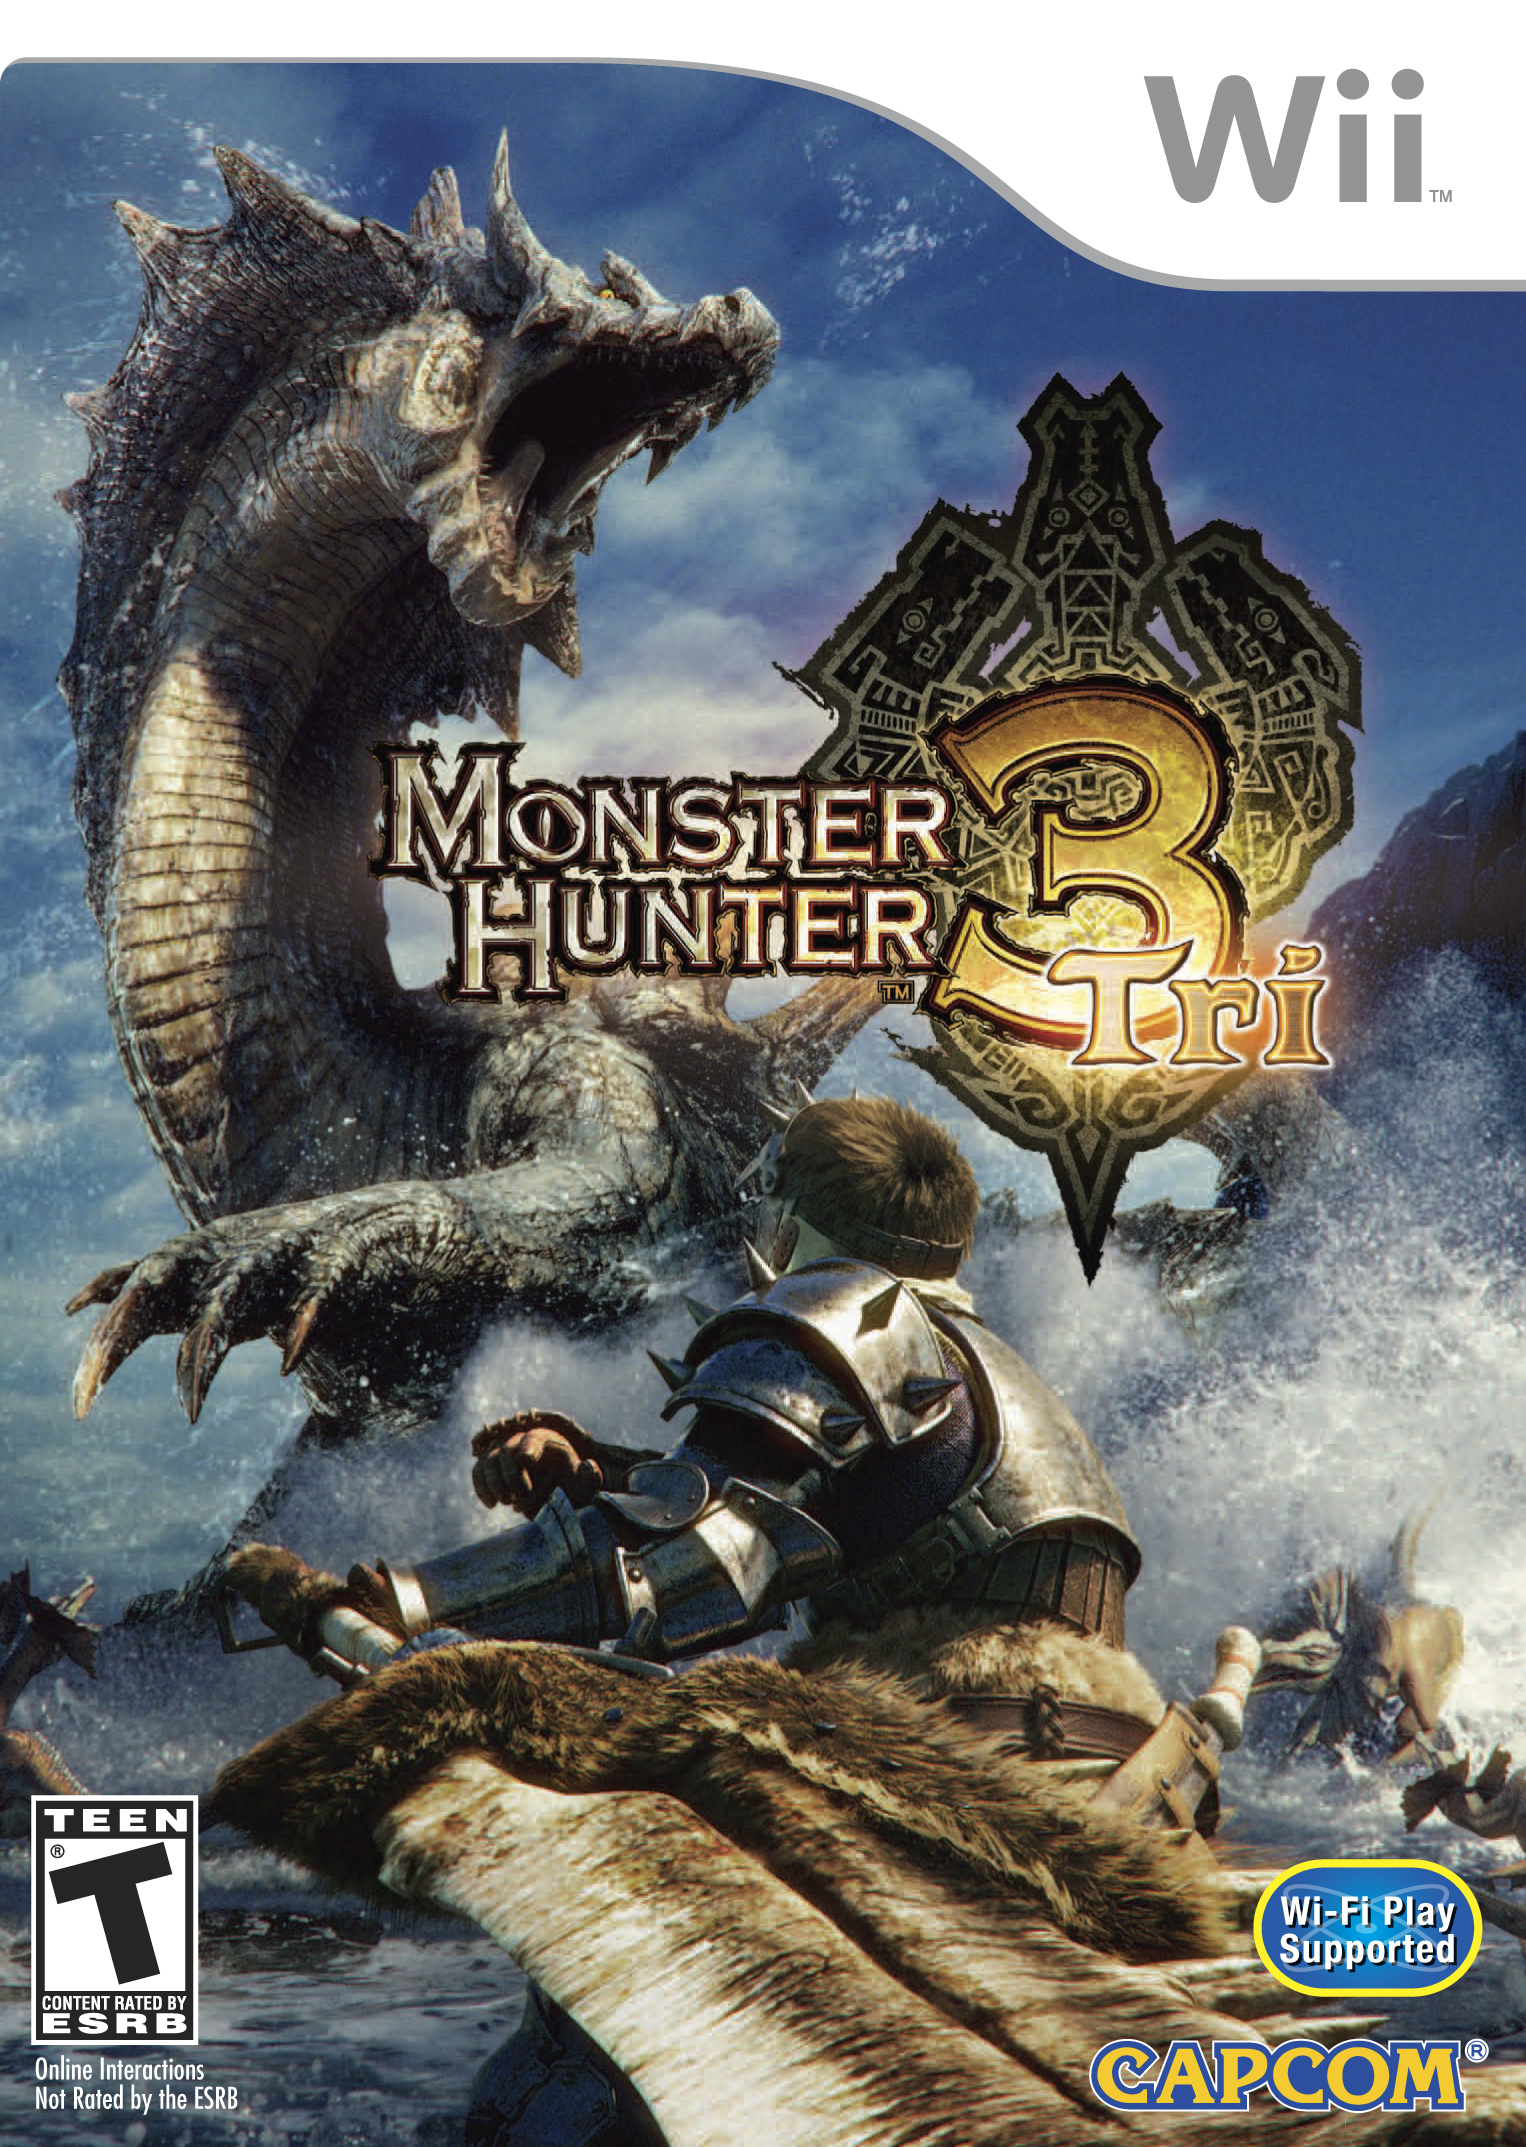 Game_Cover-MH3_US.jpg